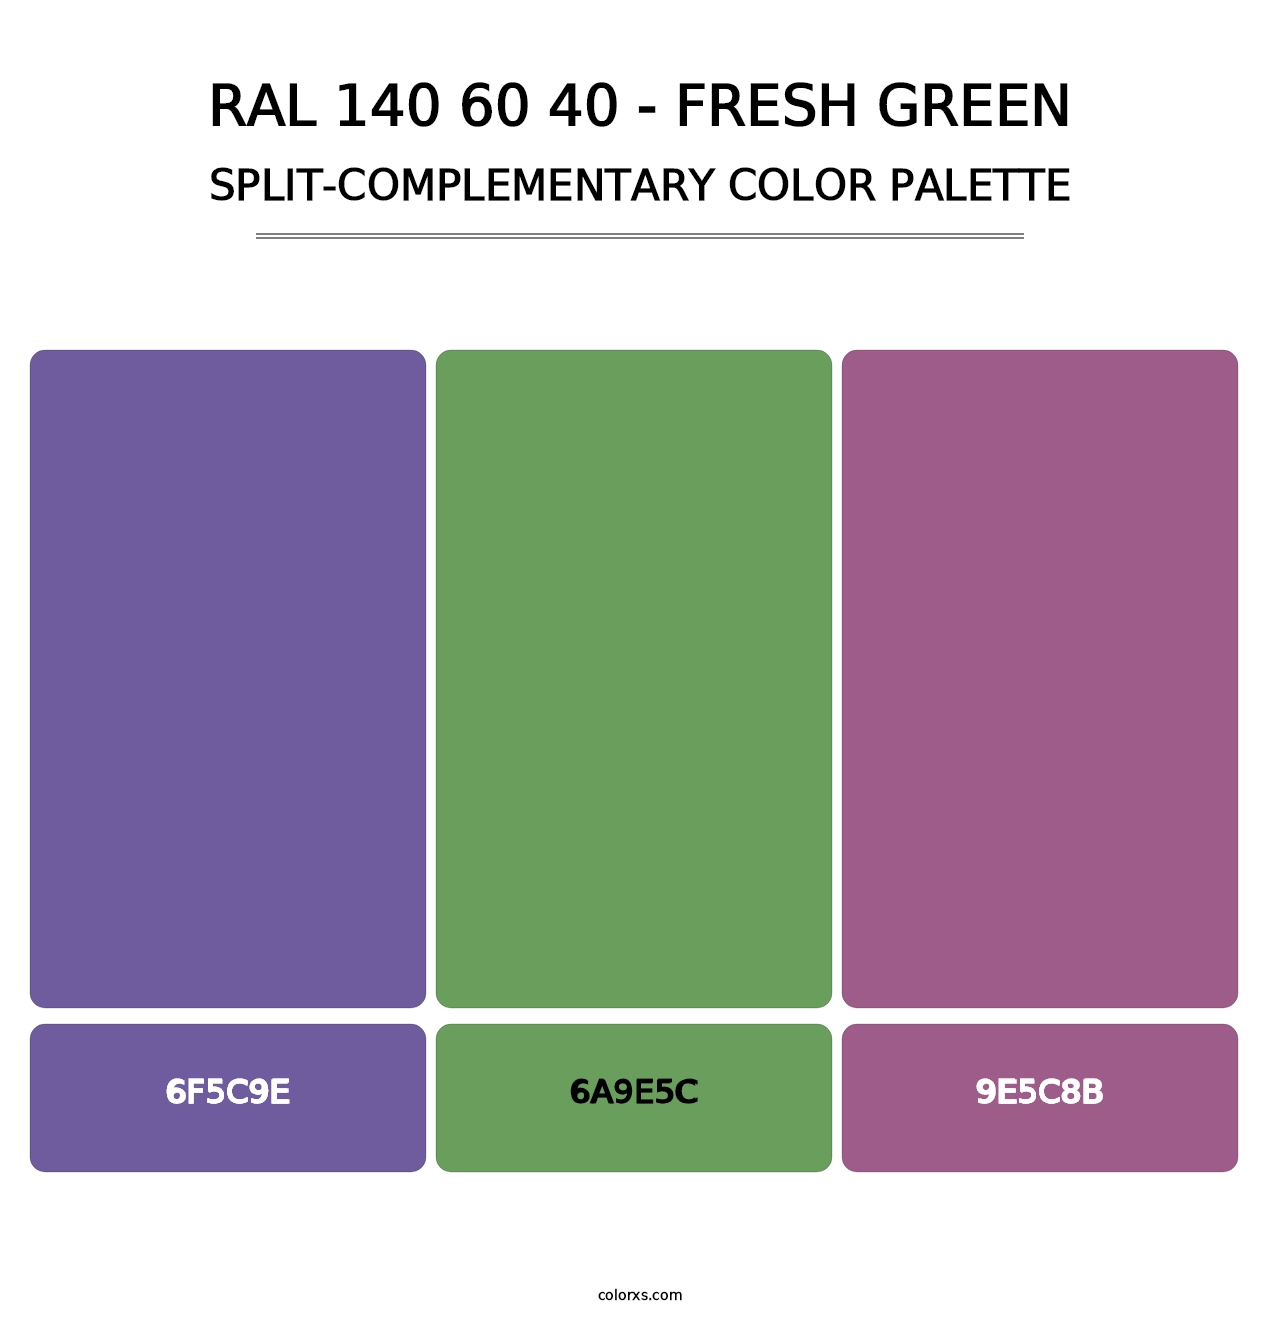 RAL 140 60 40 - Fresh Green - Split-Complementary Color Palette